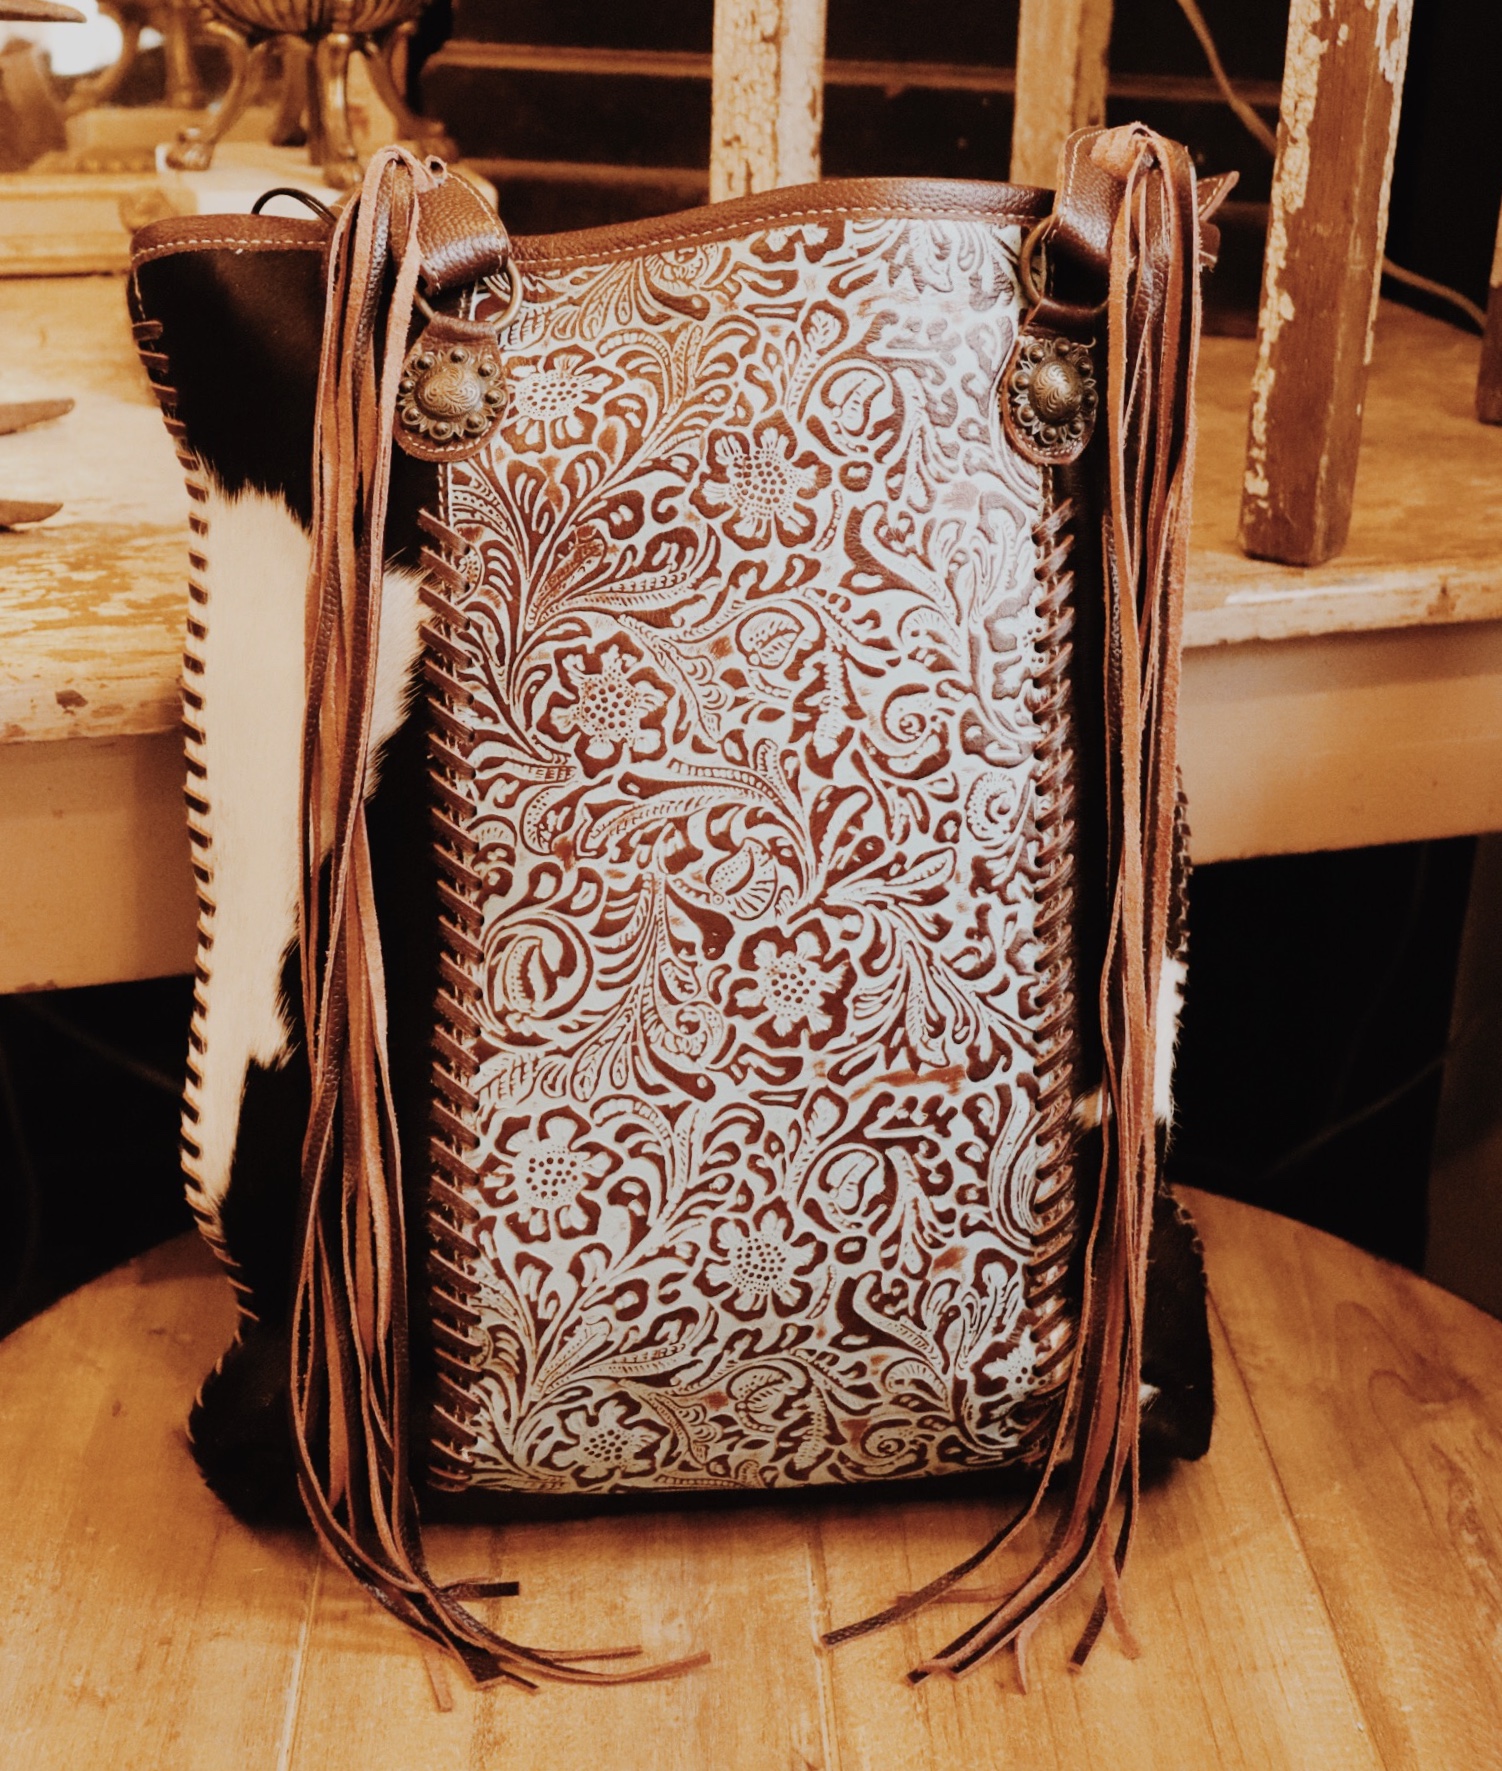 This Myra brand bag measures 15 inches long by 15 inches wide and is adorned by turquoise tooled leather, cowhide, and fringe! This bag has plenty of pockets for storage.